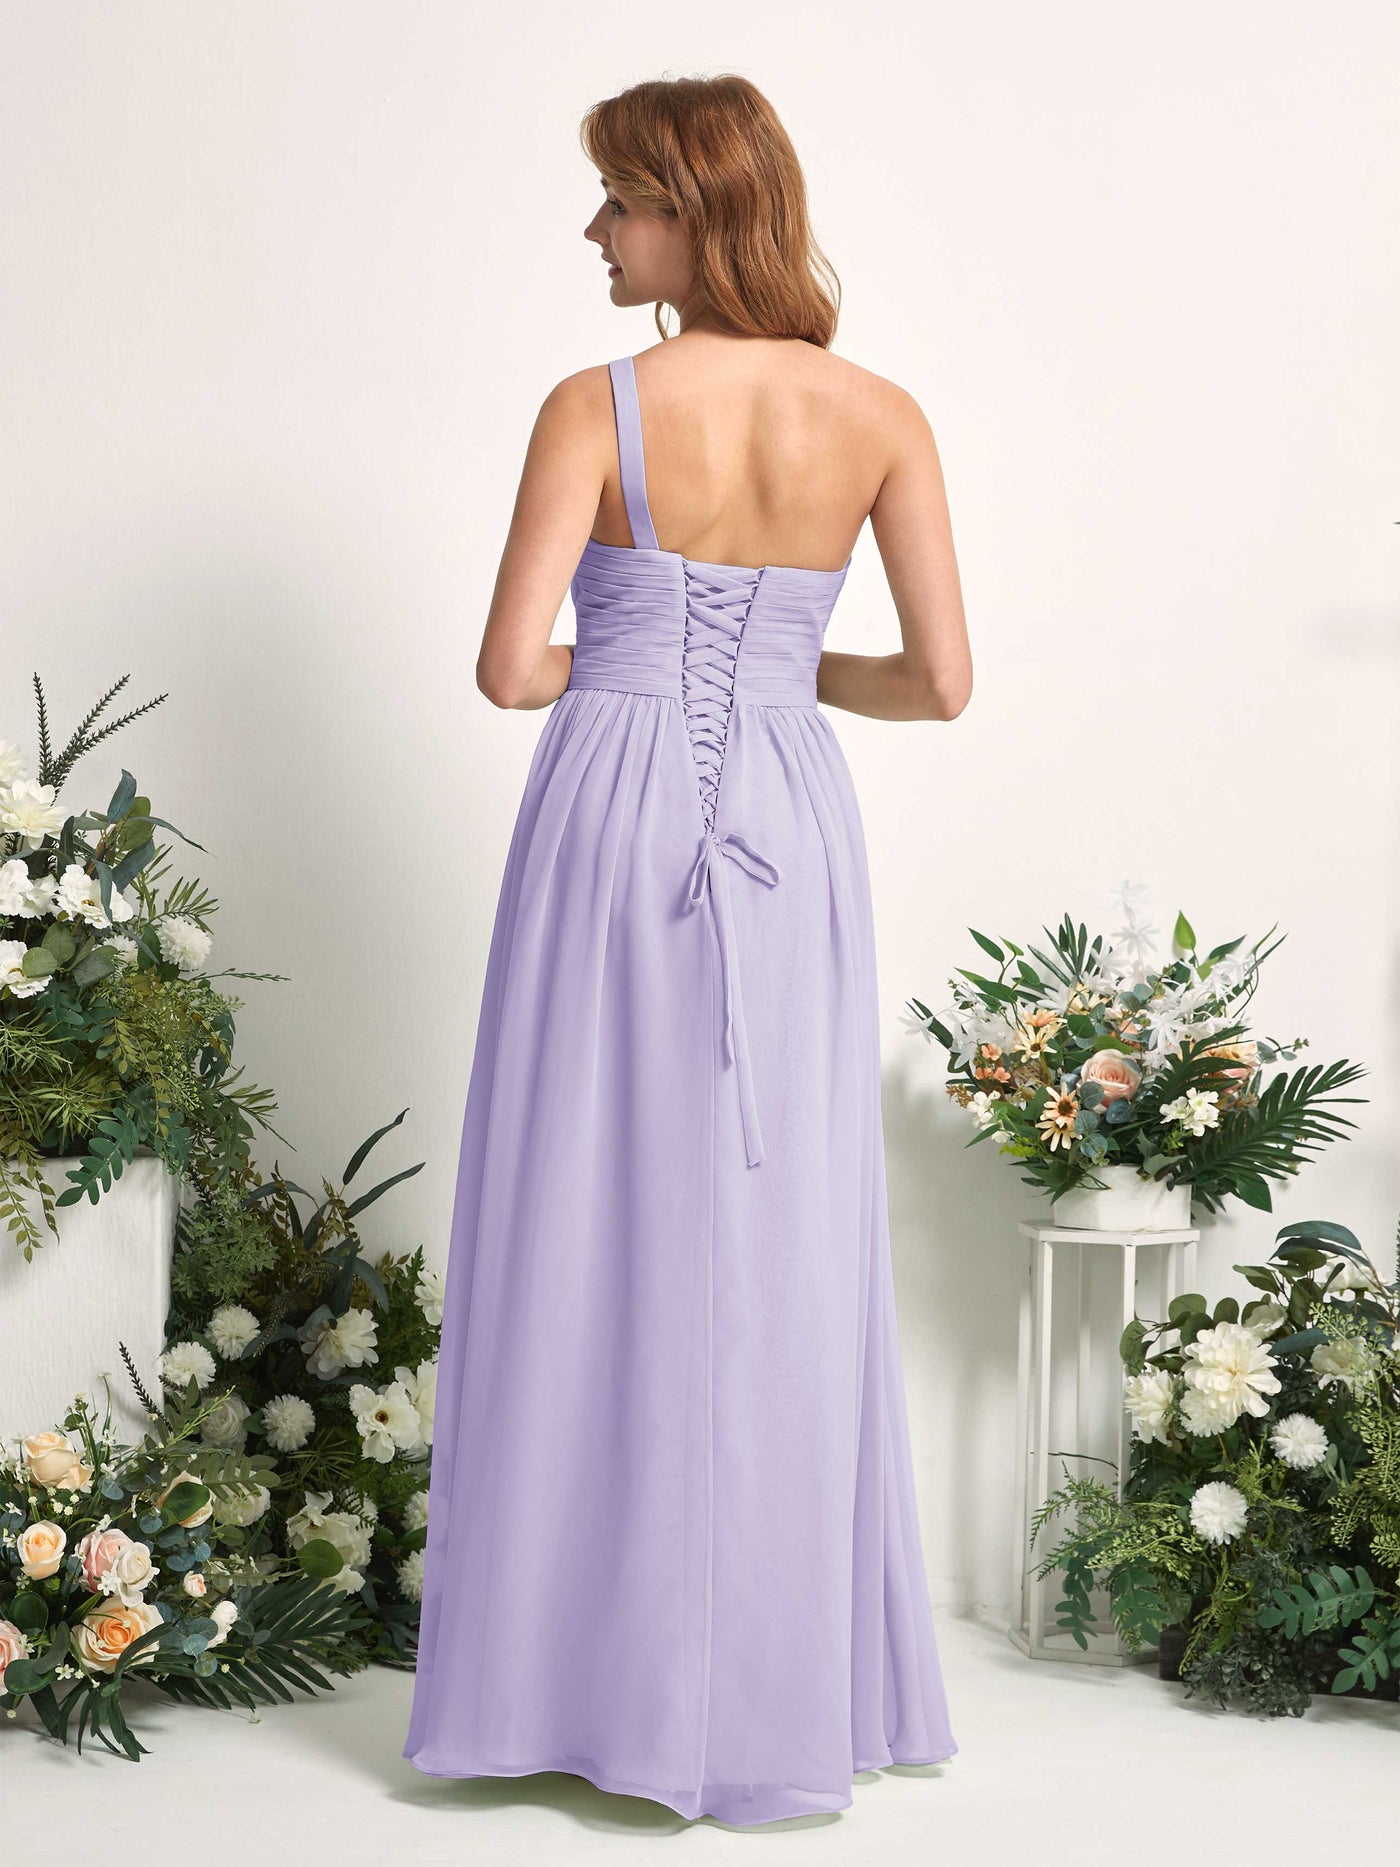 Bridesmaid Dress A-line Chiffon One Shoulder Full Length Sleeveless Wedding Party Dress - Lilac (81226714)#color_lilac